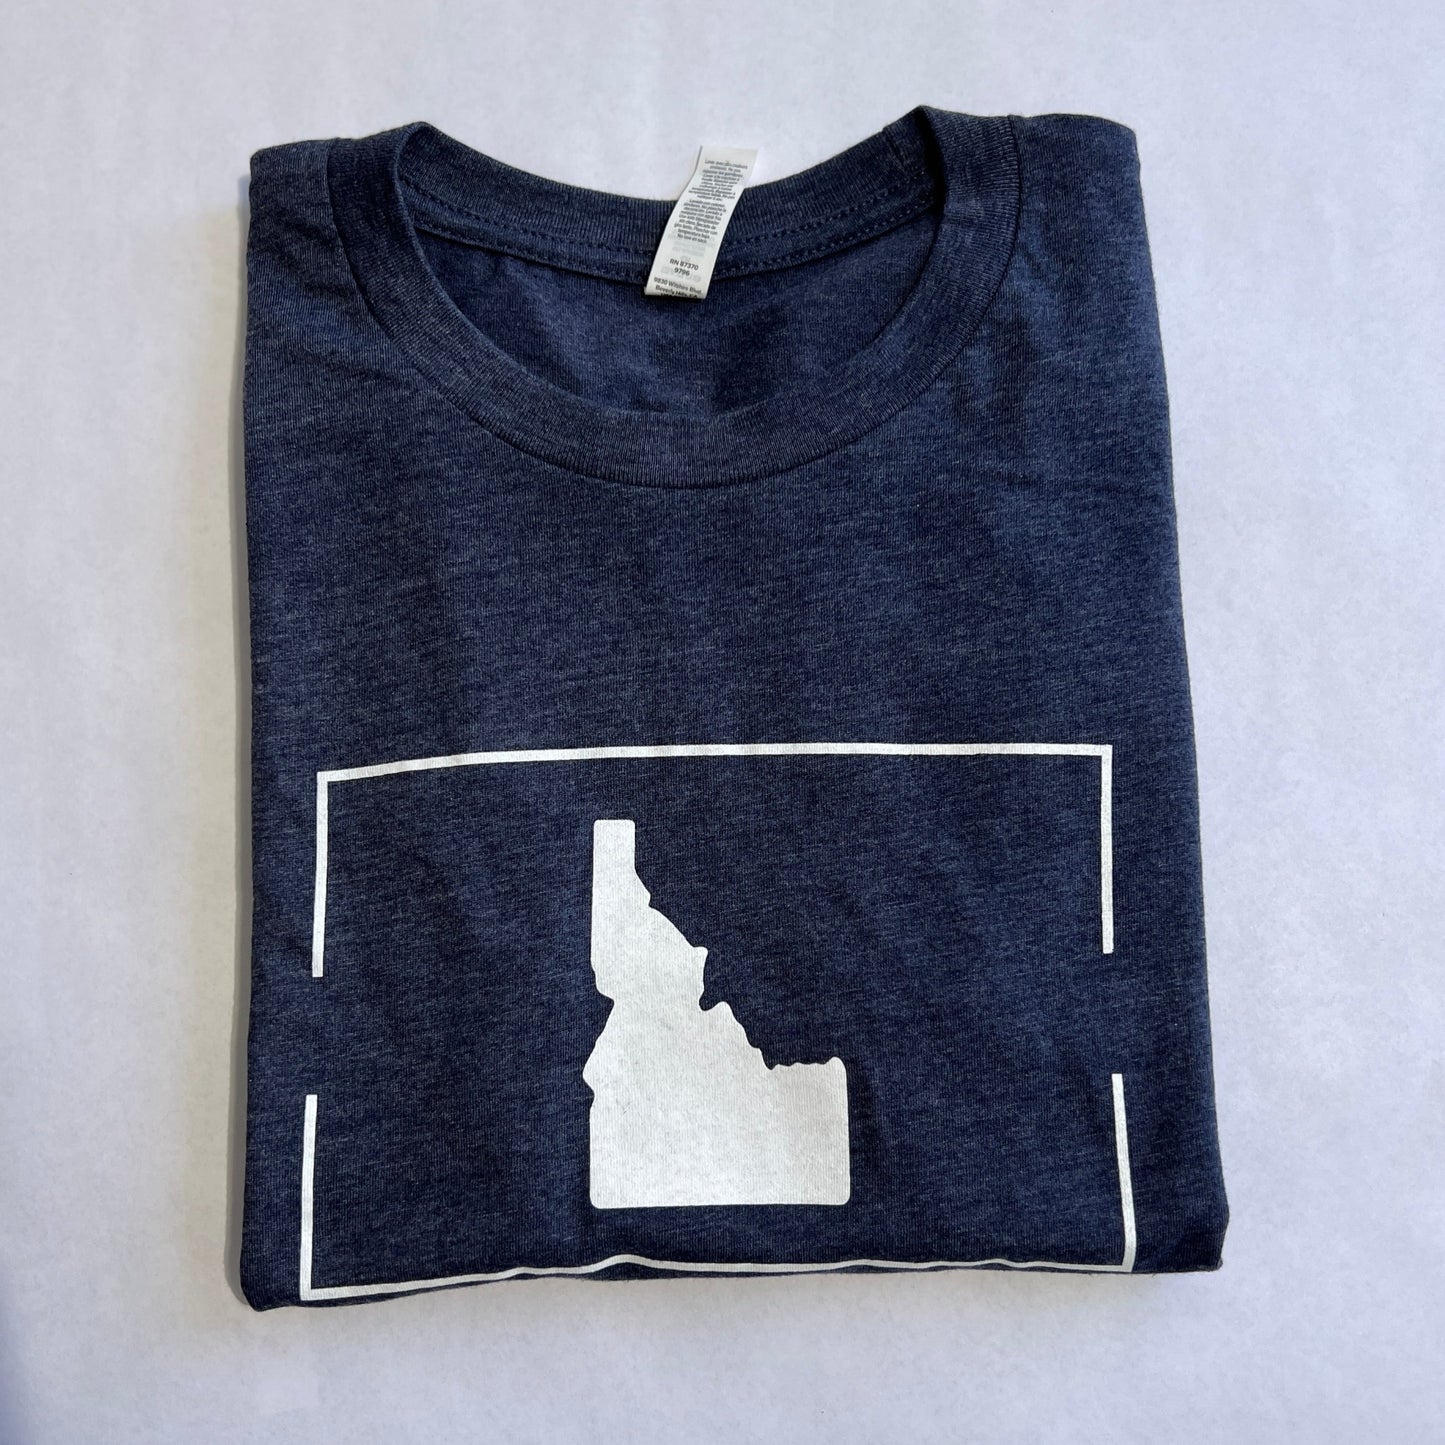 This Heather Navy Idaho T Shirt is ultra soft and cozy. It has a simple Idaho on the front with a classic clean feeling. This T Shirt is designed by TatorJo, an Idaho Apparel company owned and operated in Idaho. Durability is our focus, all items are screen printed in Idaho. This Idaho T shirt is screen printed in Idaho. Grab yourself this Idaho T shirt today!